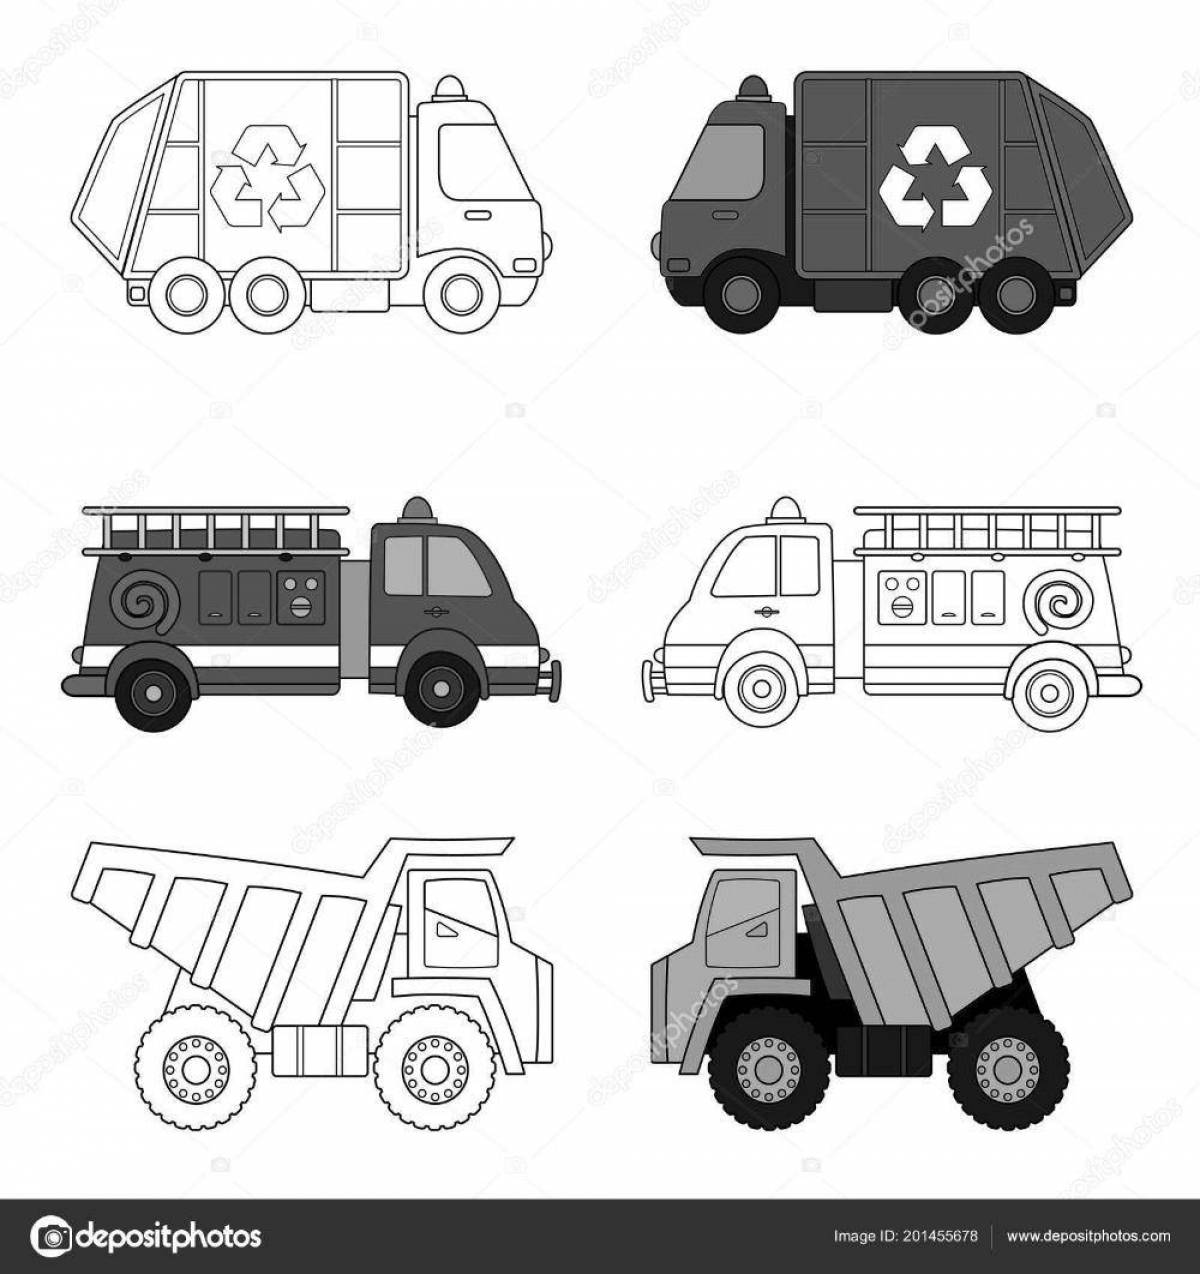 Incredible garbage truck coloring book for kids 3-4 years old